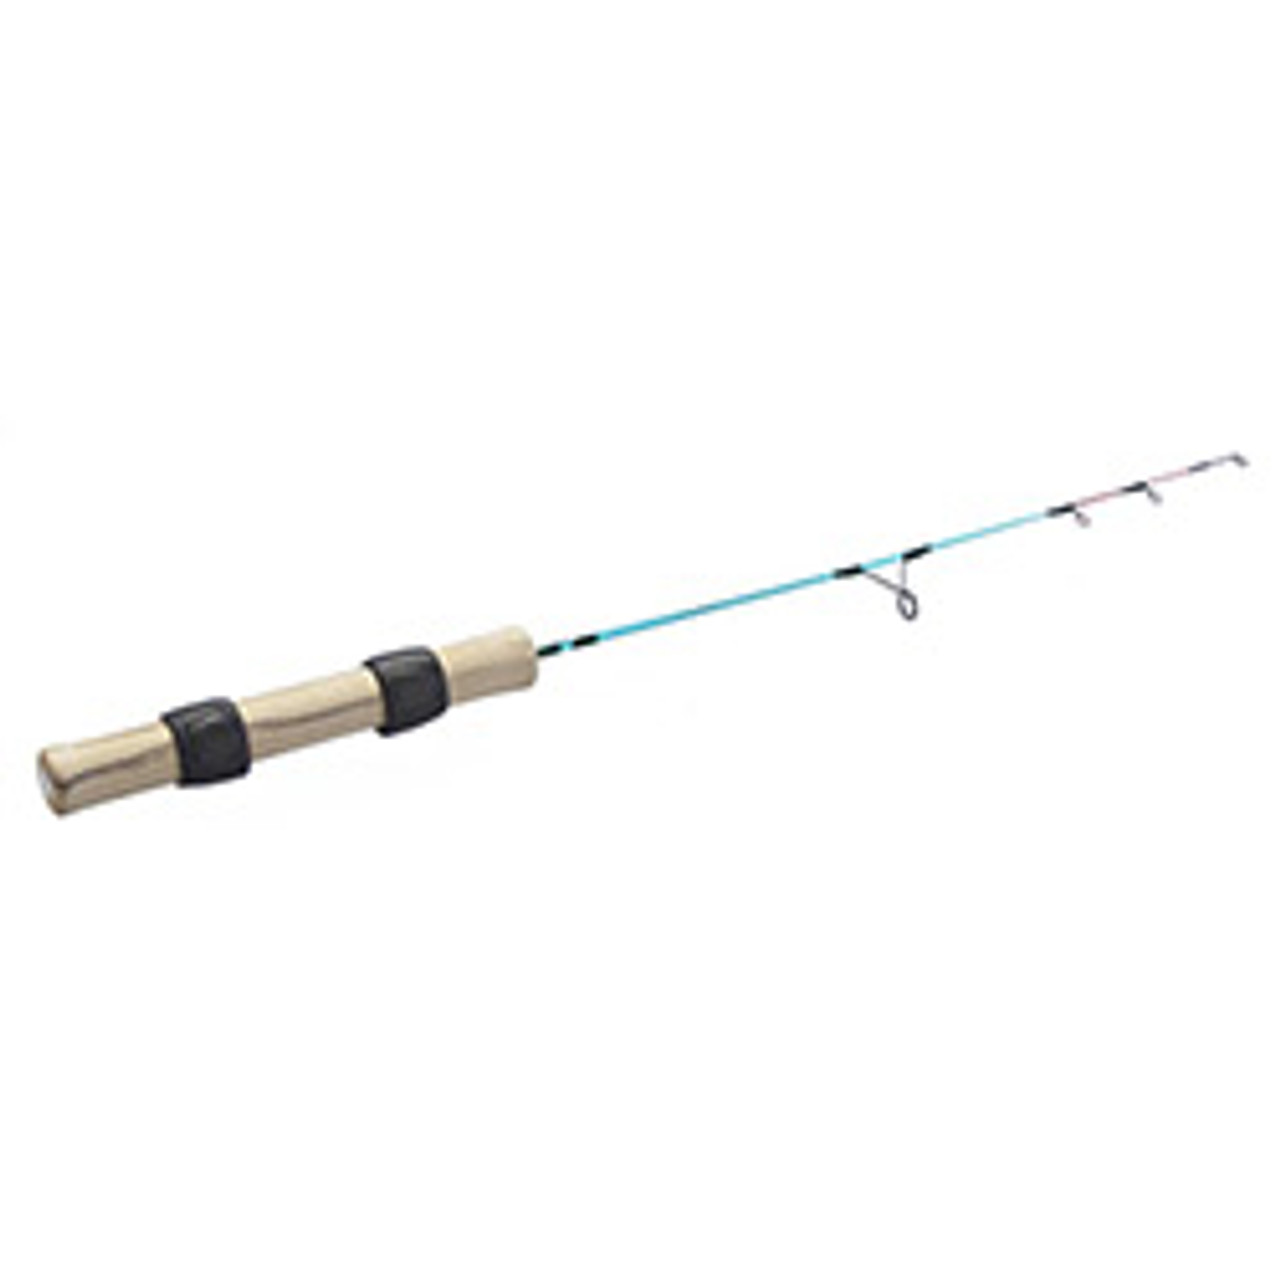 Arctic Blue Ice Fishing Rod by Schooley